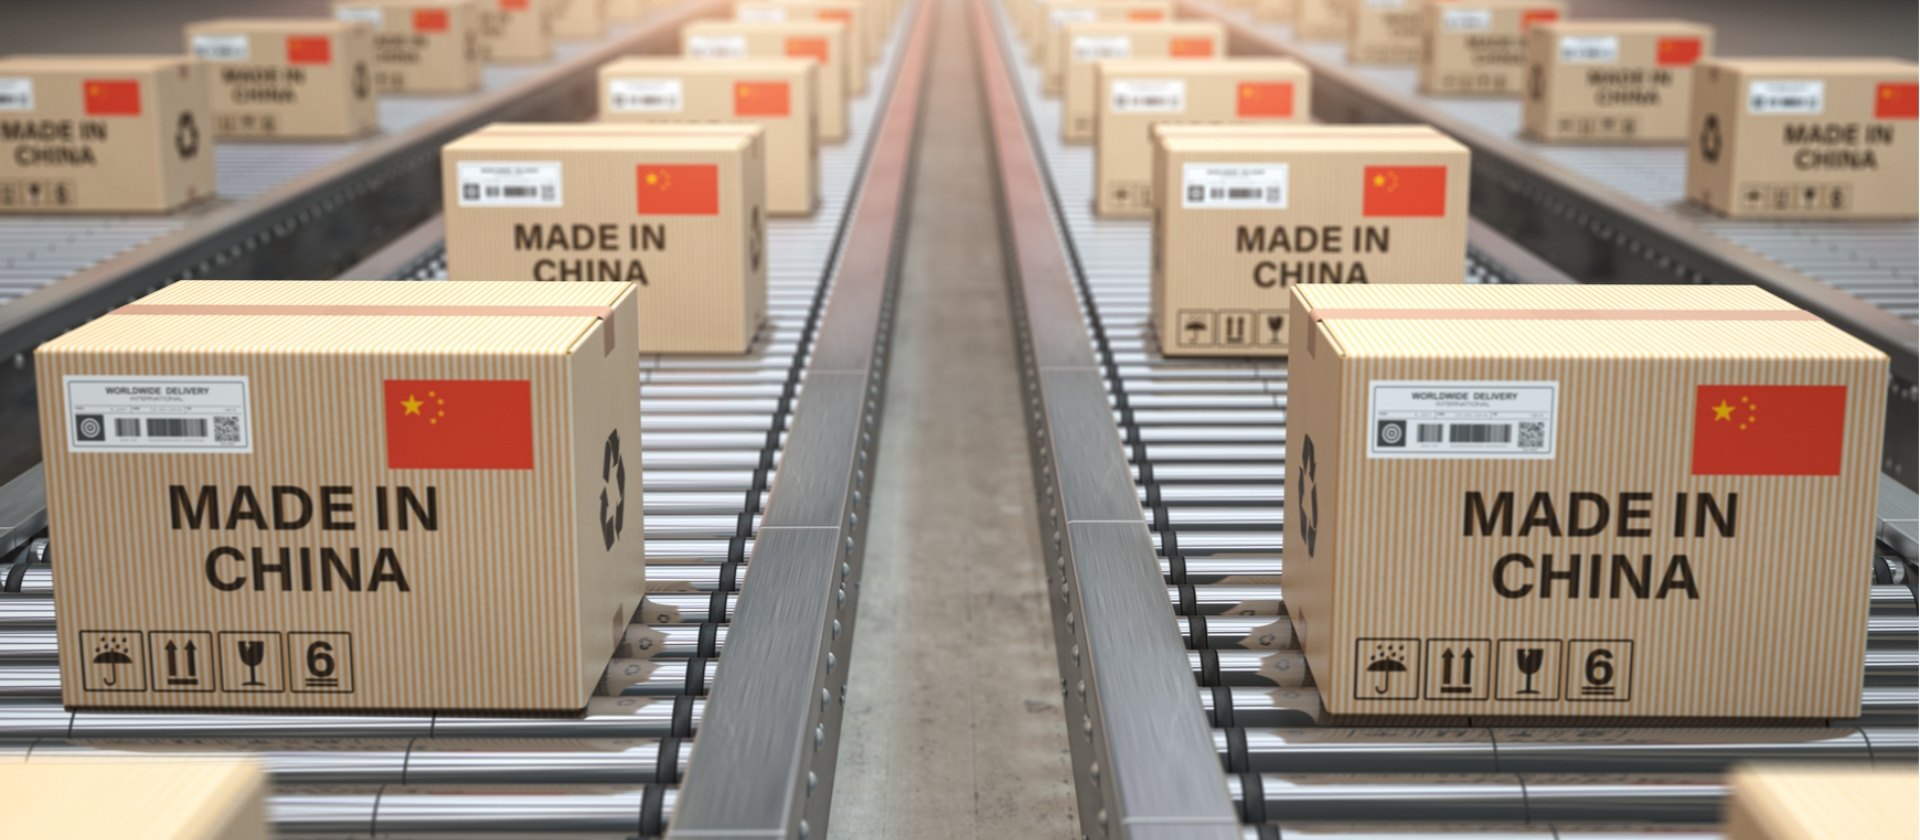 Boxes marked with made in China are conveying on the conveyor.